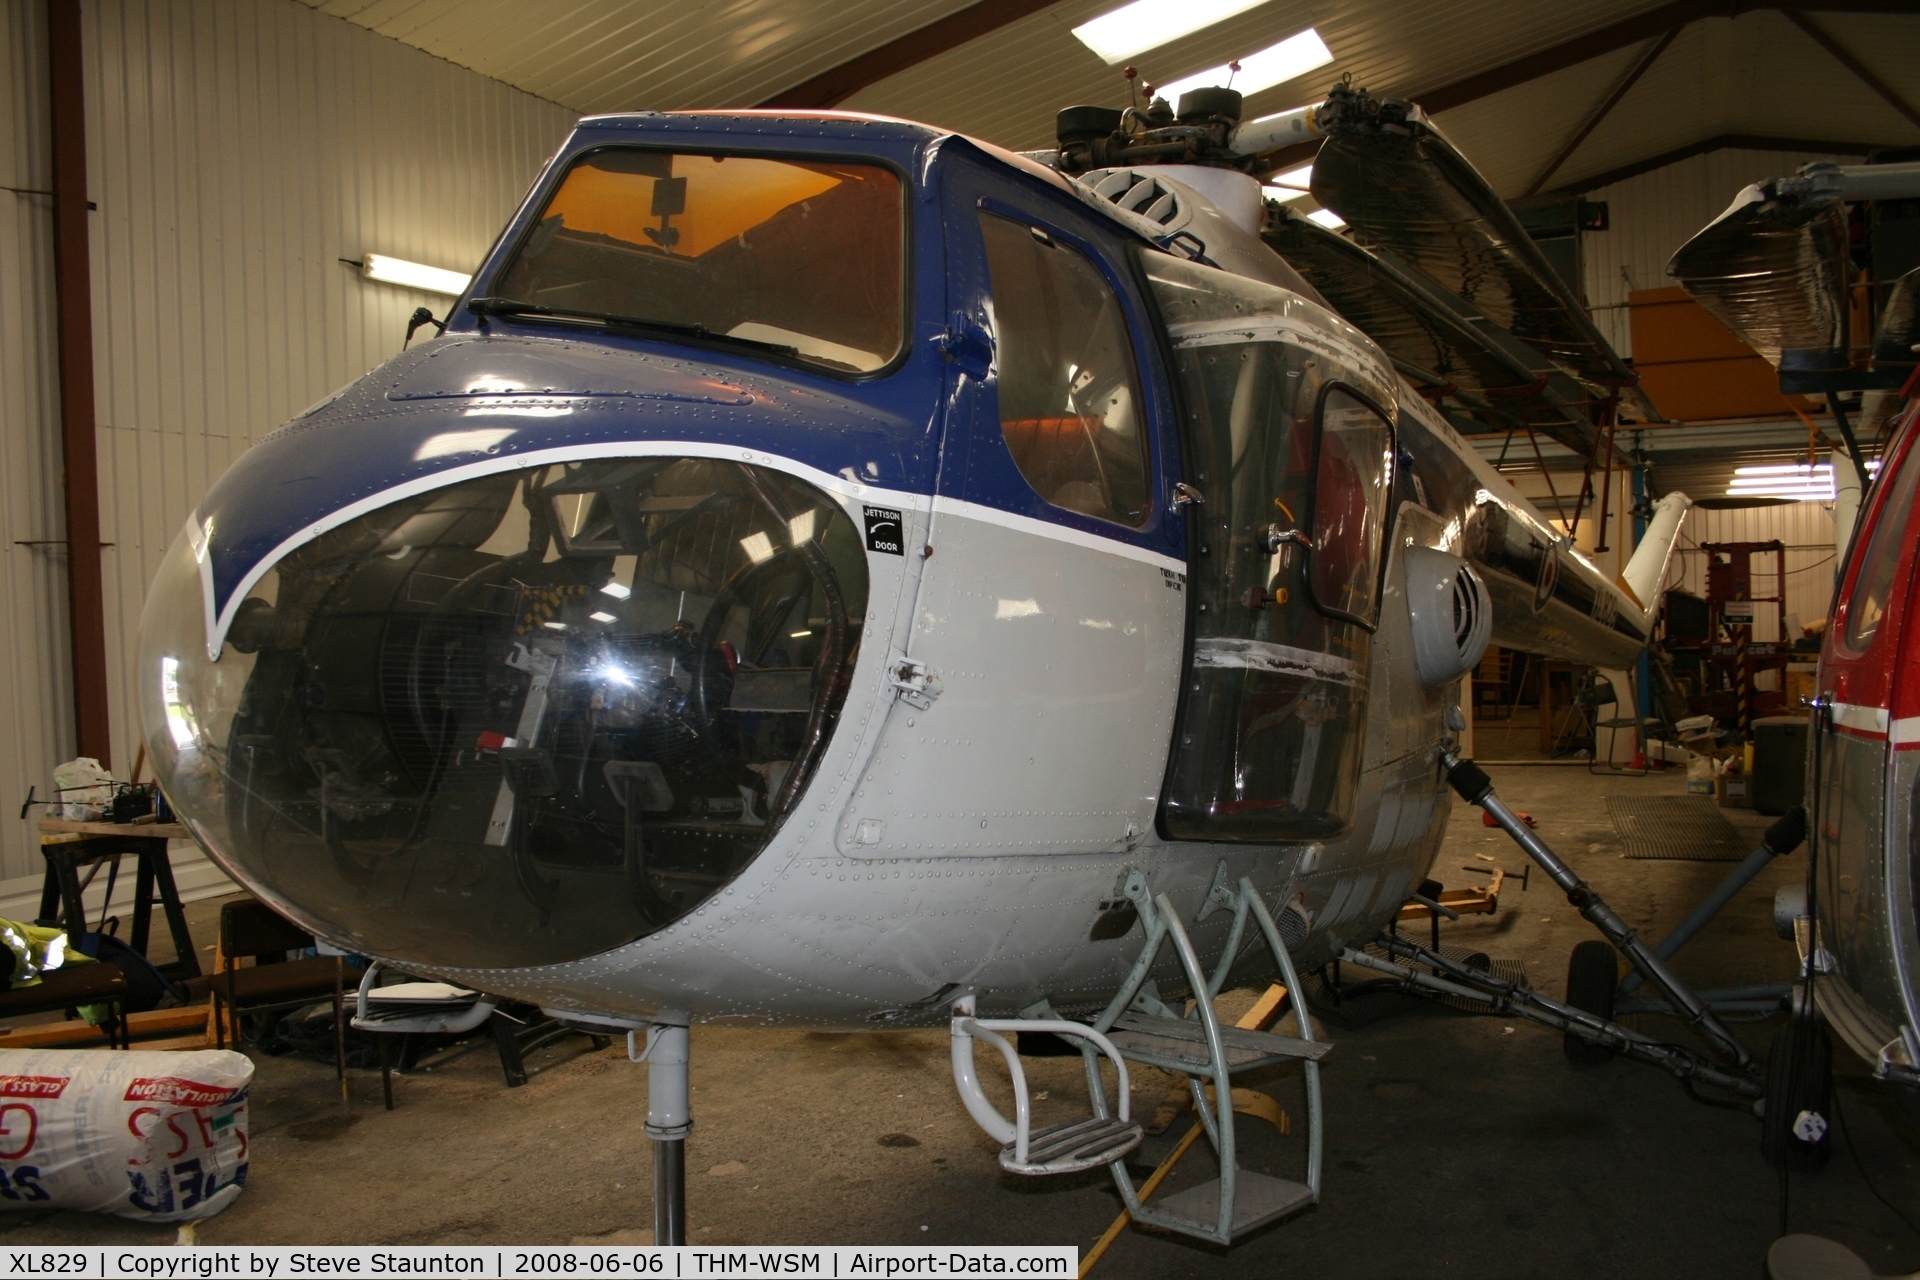 XL829, 1957 Bristol 171 Sycamore HR.14 C/N 13474, Taken at the Helicopter Museum (http://www.helicoptermuseum.co.uk/)